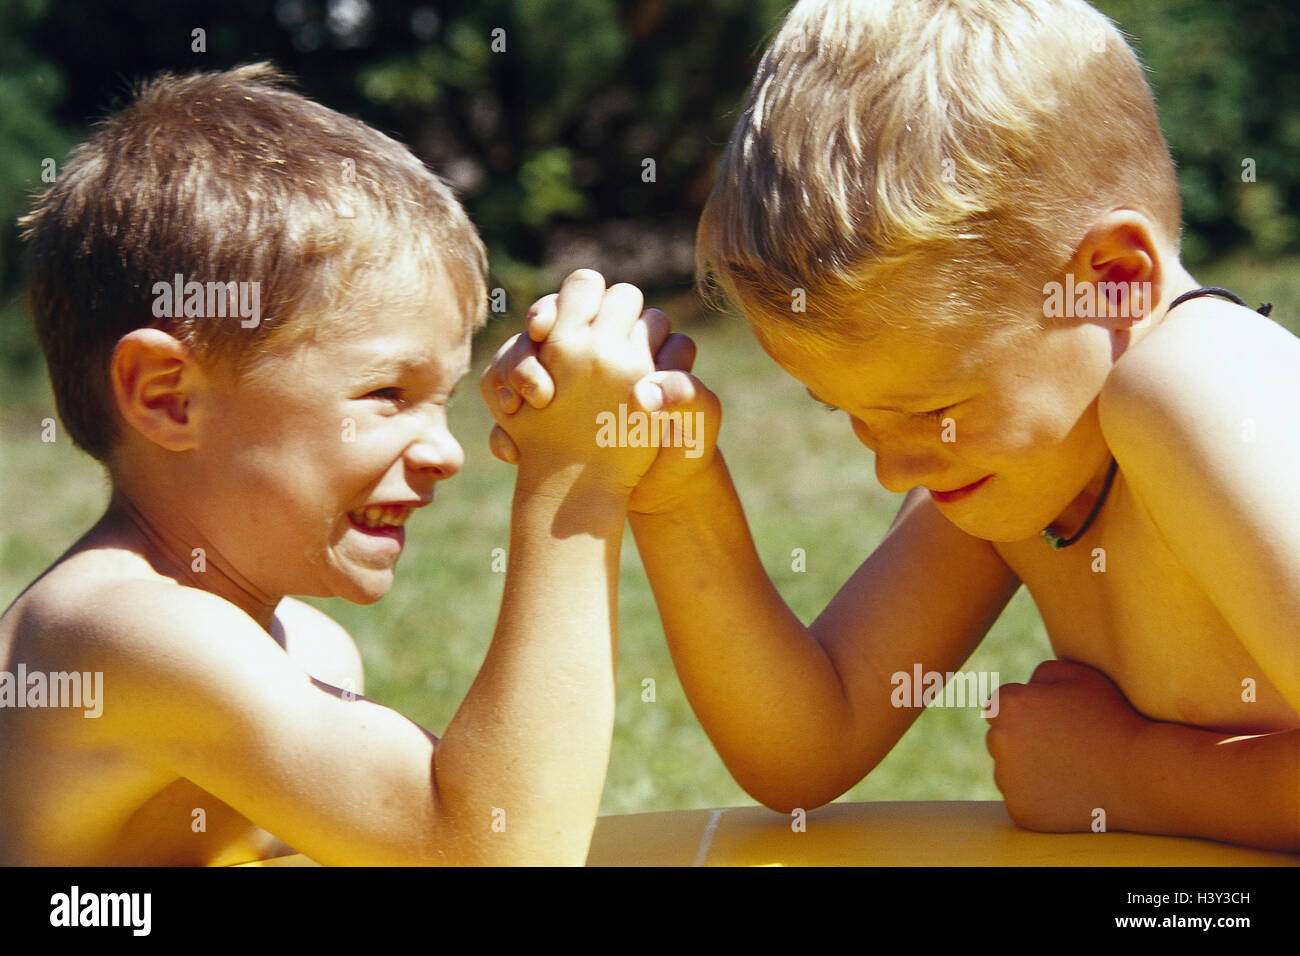 Children, boys, upper part of the body, freely, Indian wrestlings, side view, friends, friendship, showdown, friendship, starch, prove, proof, rehearsal, force, forces measure, force fairs, strain, exert, summer, outside, very close Stock Photo